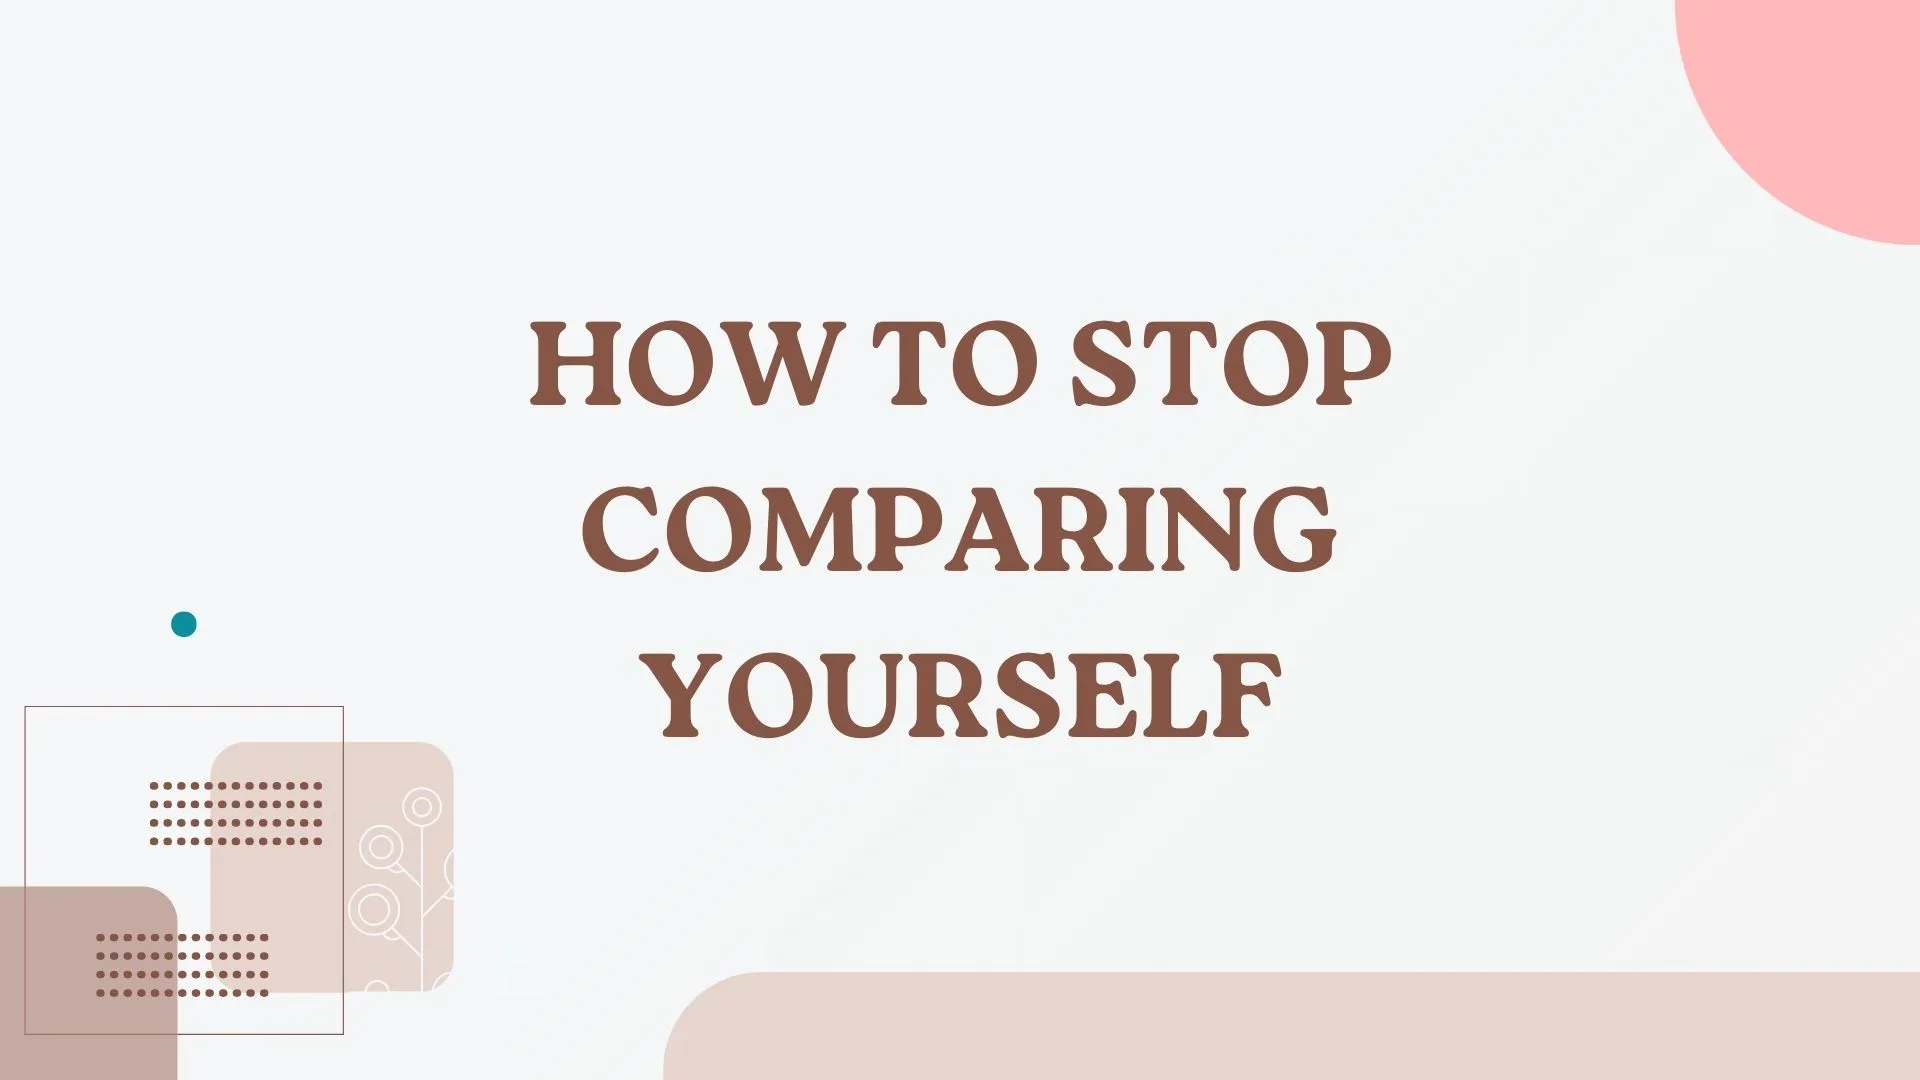 How to Stop Comparing Yourself